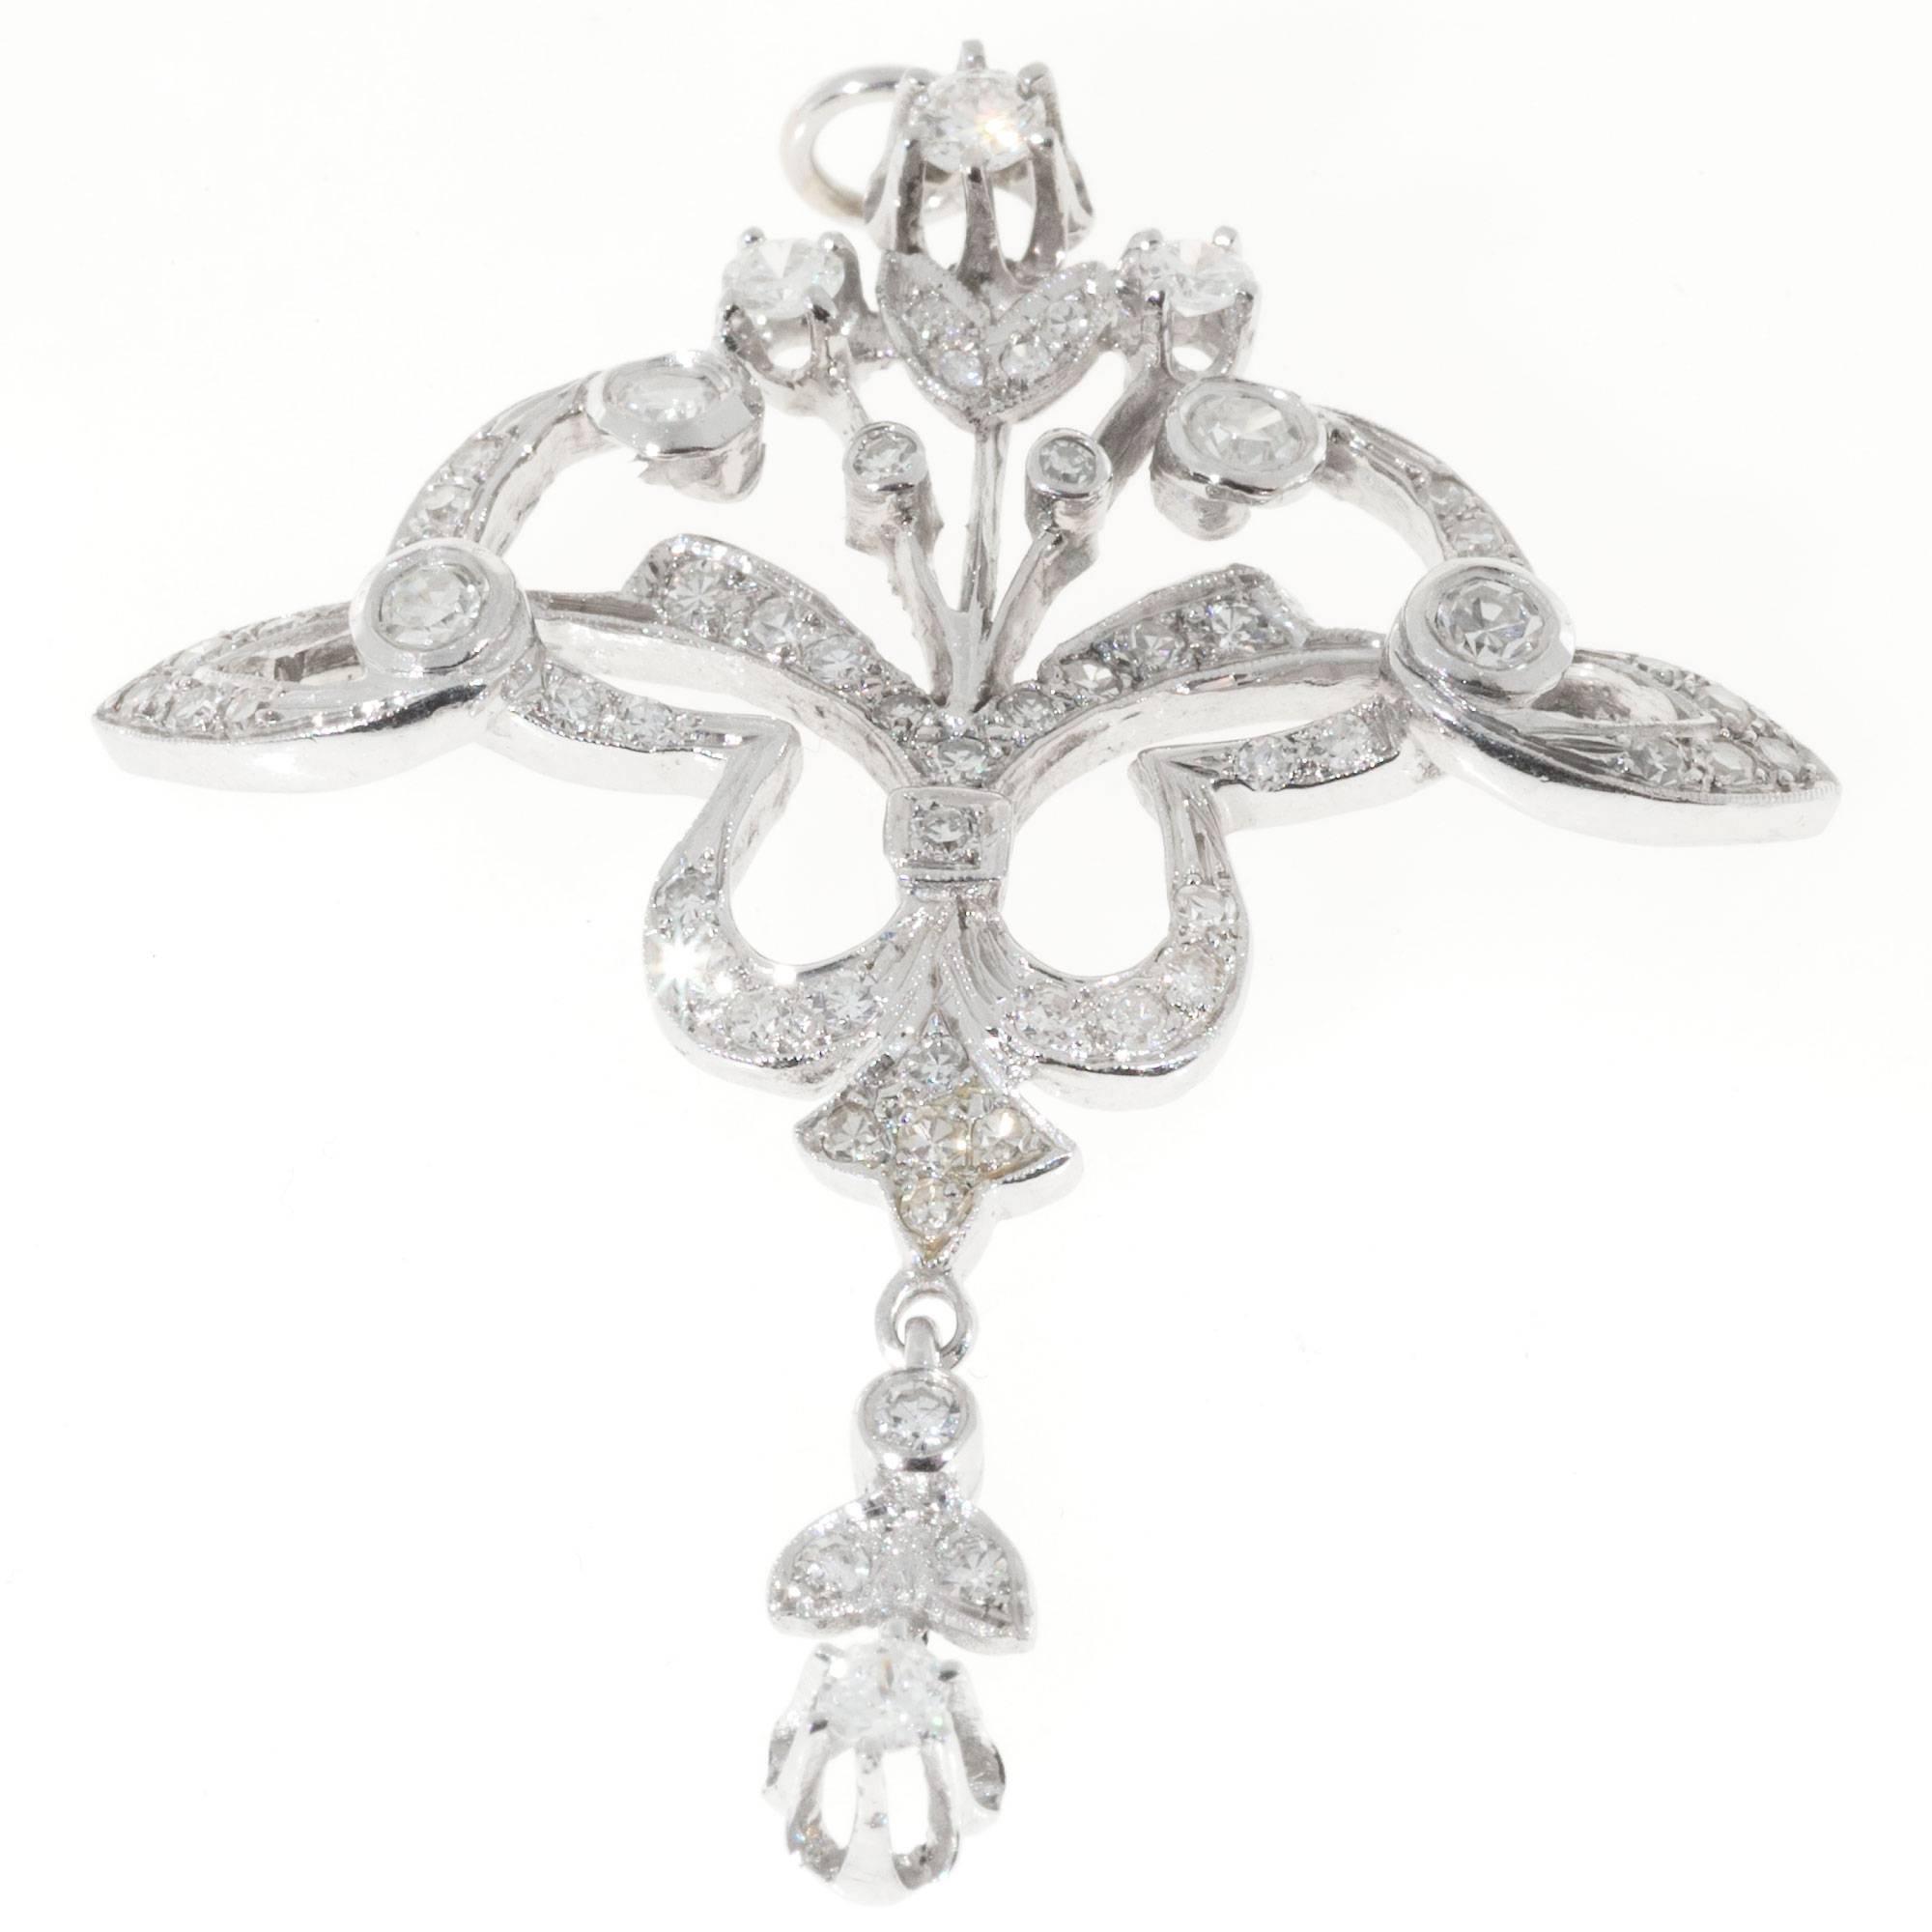 1940-1950 14k white gold pendant with fine white diamonds. Nice bead setting and open work.

58 round diamonds mixed full and single cut, F, VS, approx. total weight 1.05cts
14k White Gold
7.4 grams
Top to bottom: 1.91 inches or 48mm
Width: